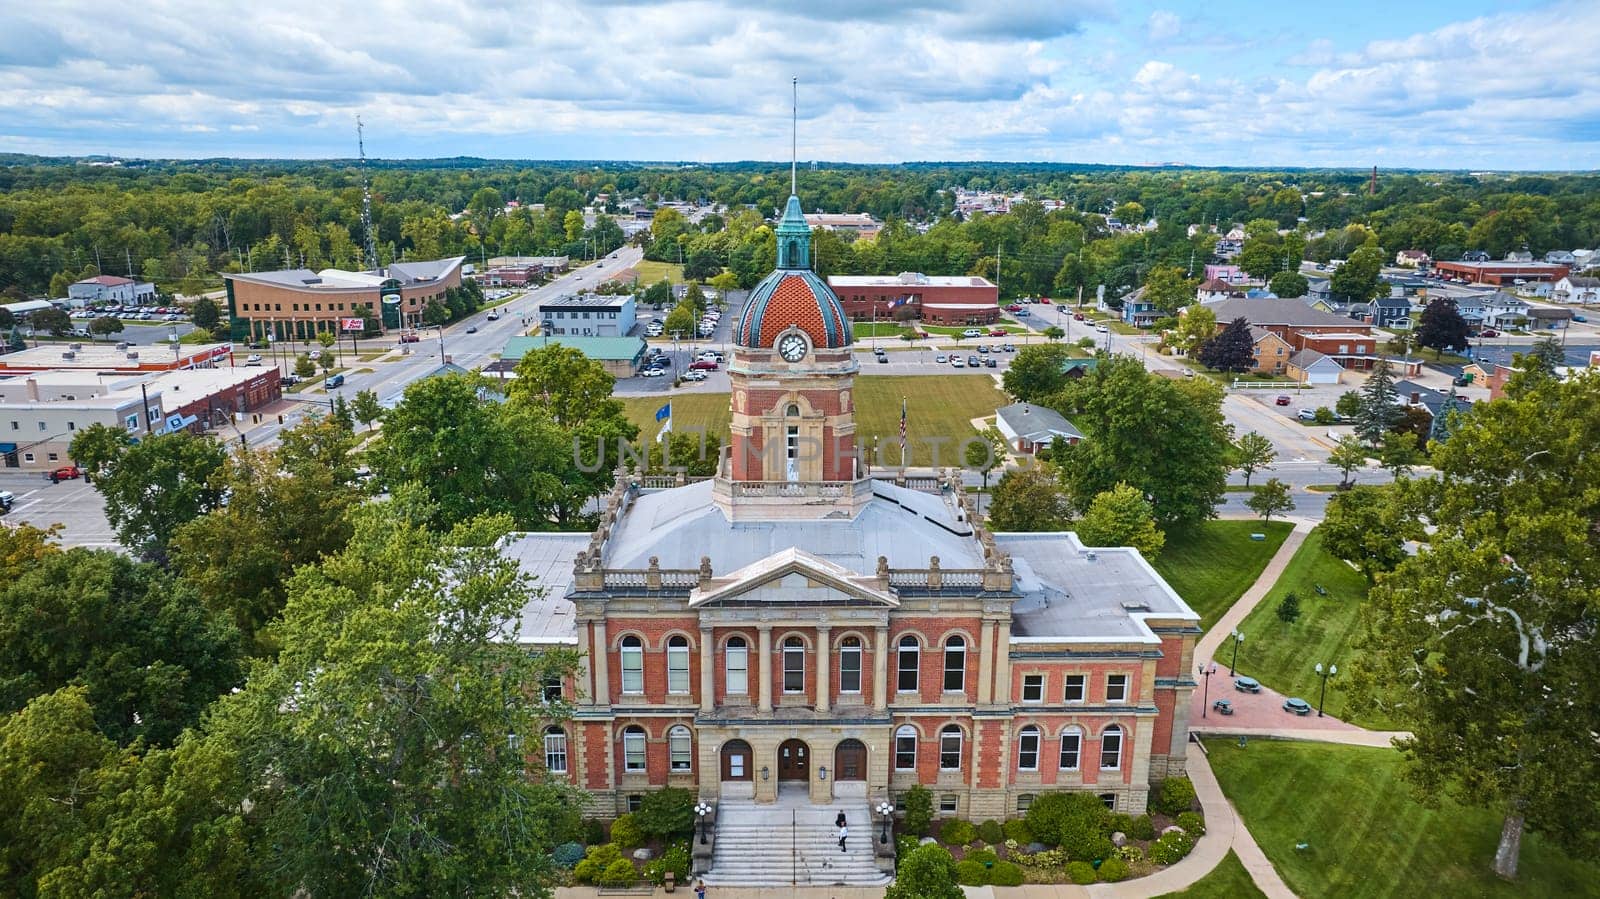 Aerial View of Historic Elkhart County Courthouse, Indiana Surrounded by Lush Greenery and Small Town Scenery